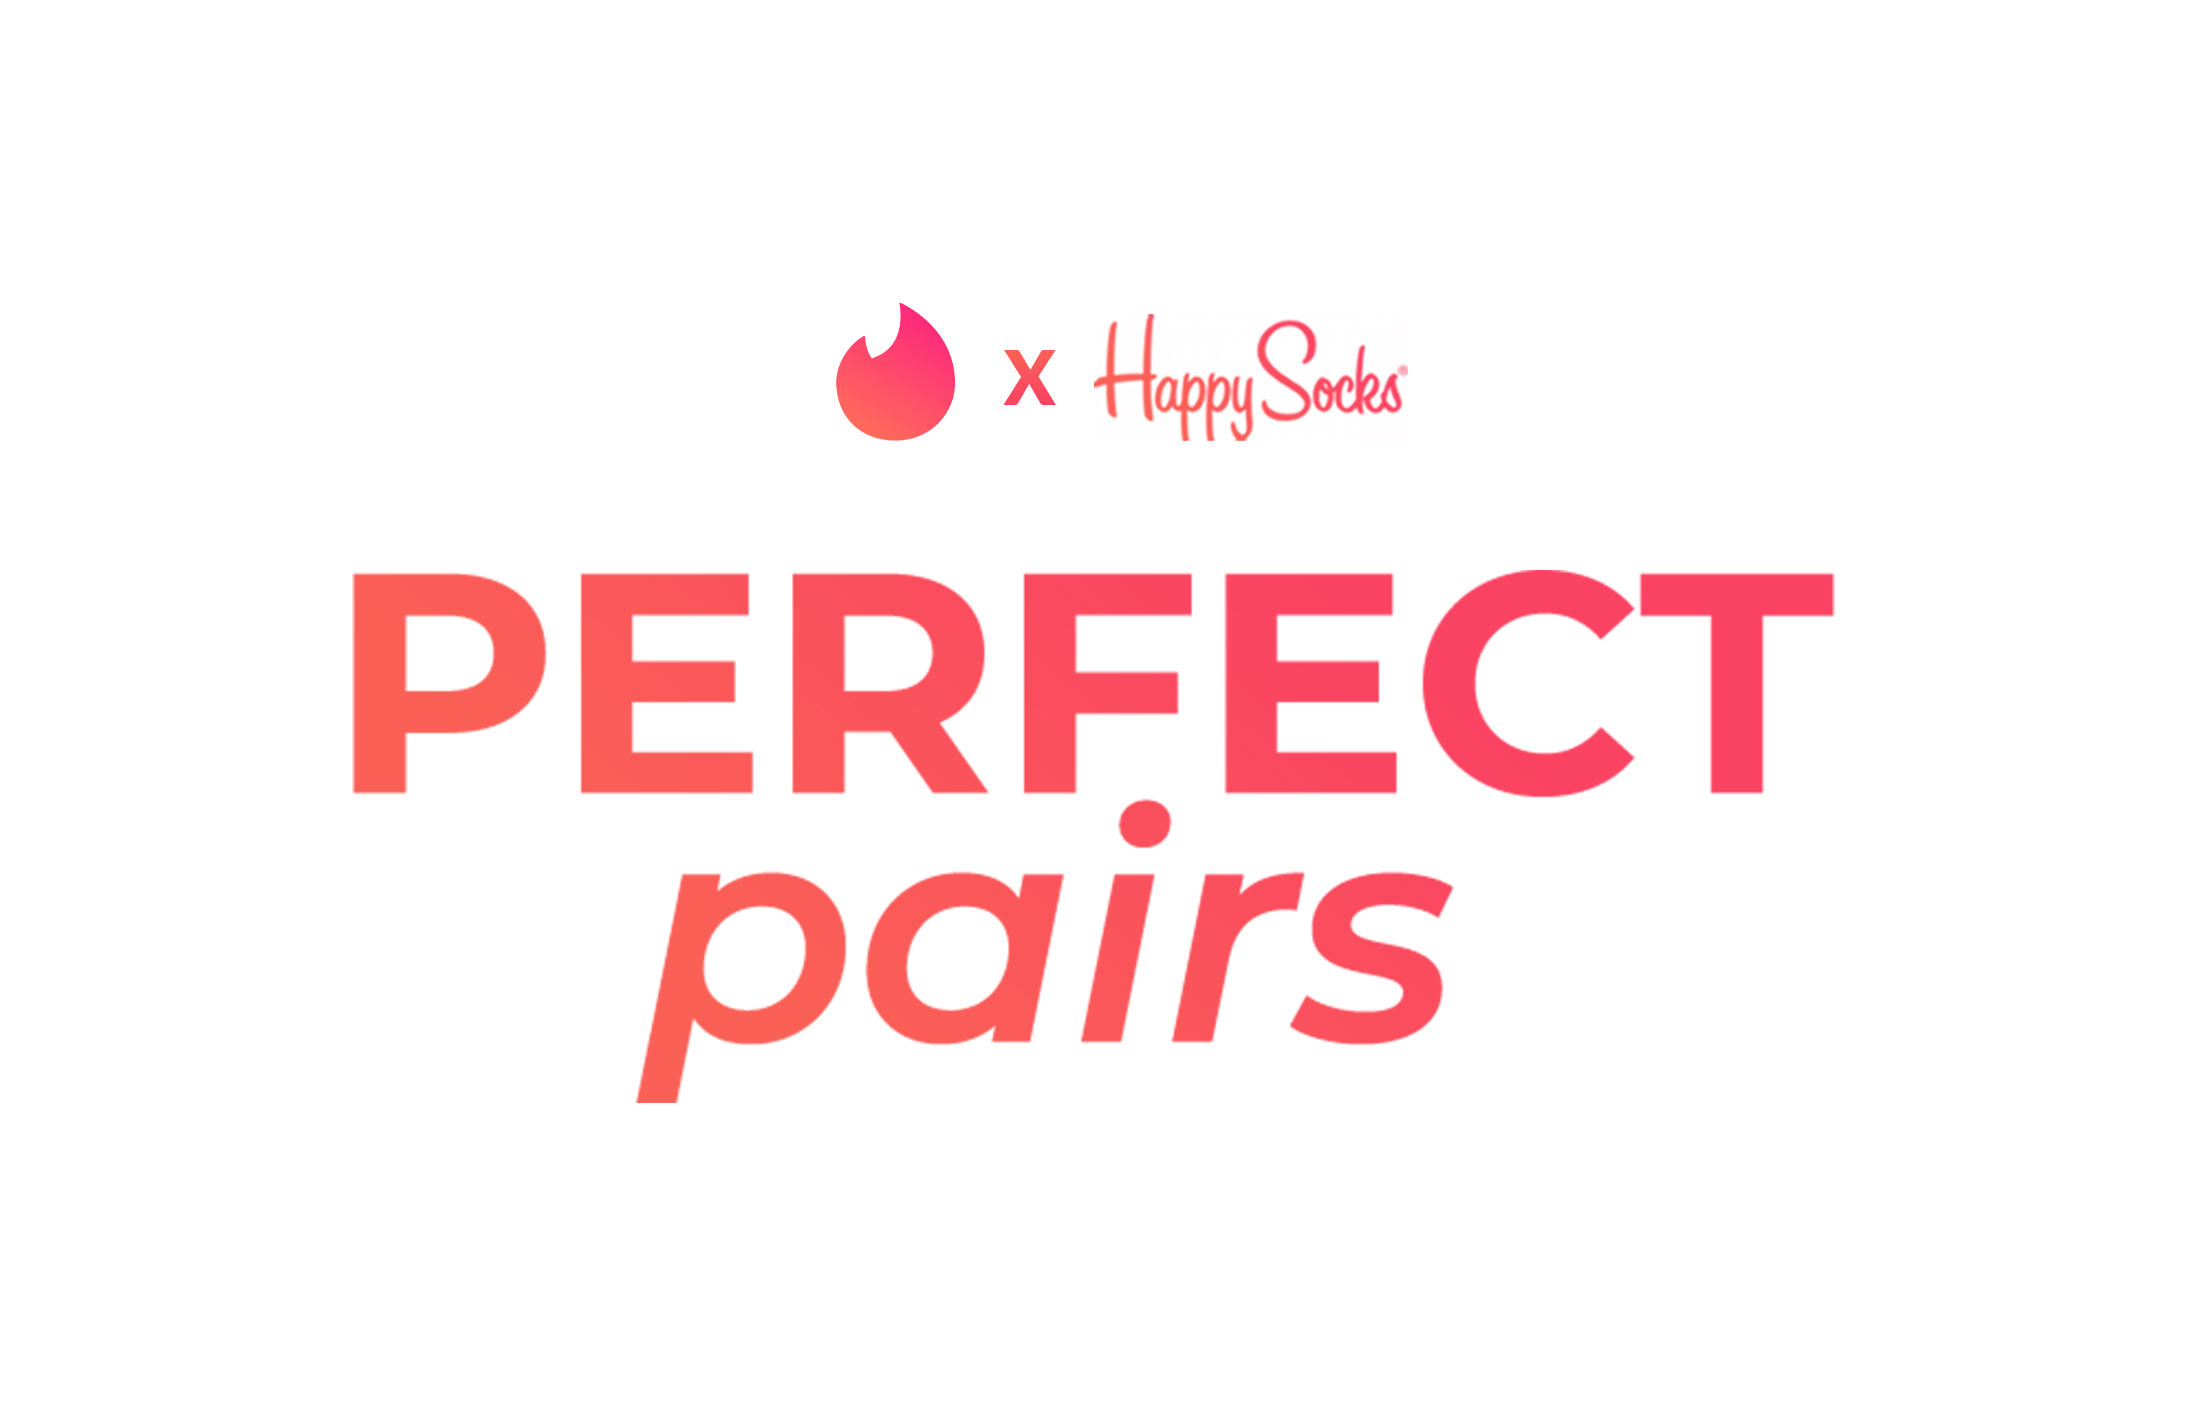 Tinder and Happy Socks advertising collaboration video explaining concept . Thumbnail is 'Perfect Pairs' in pink on white background with logos for tinder and happy socks.